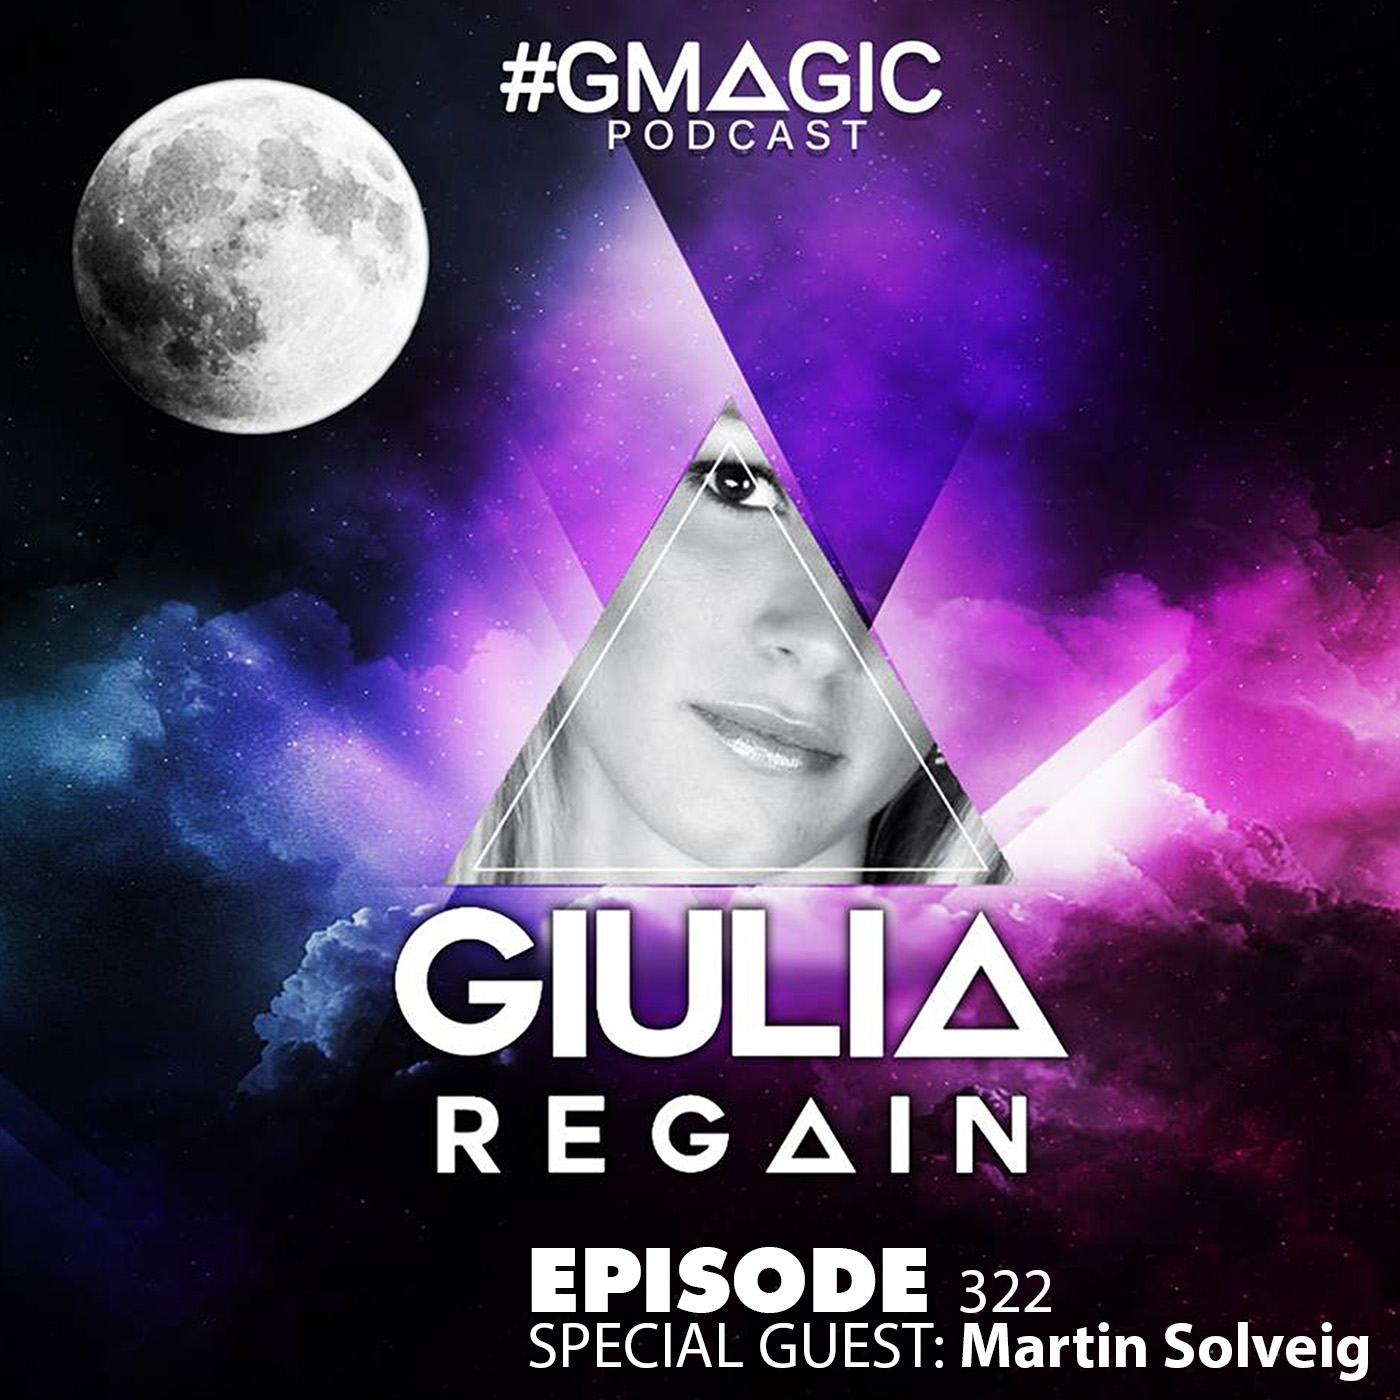 #Gmagic Podcast 322 - Special Guest: Martin Solveig